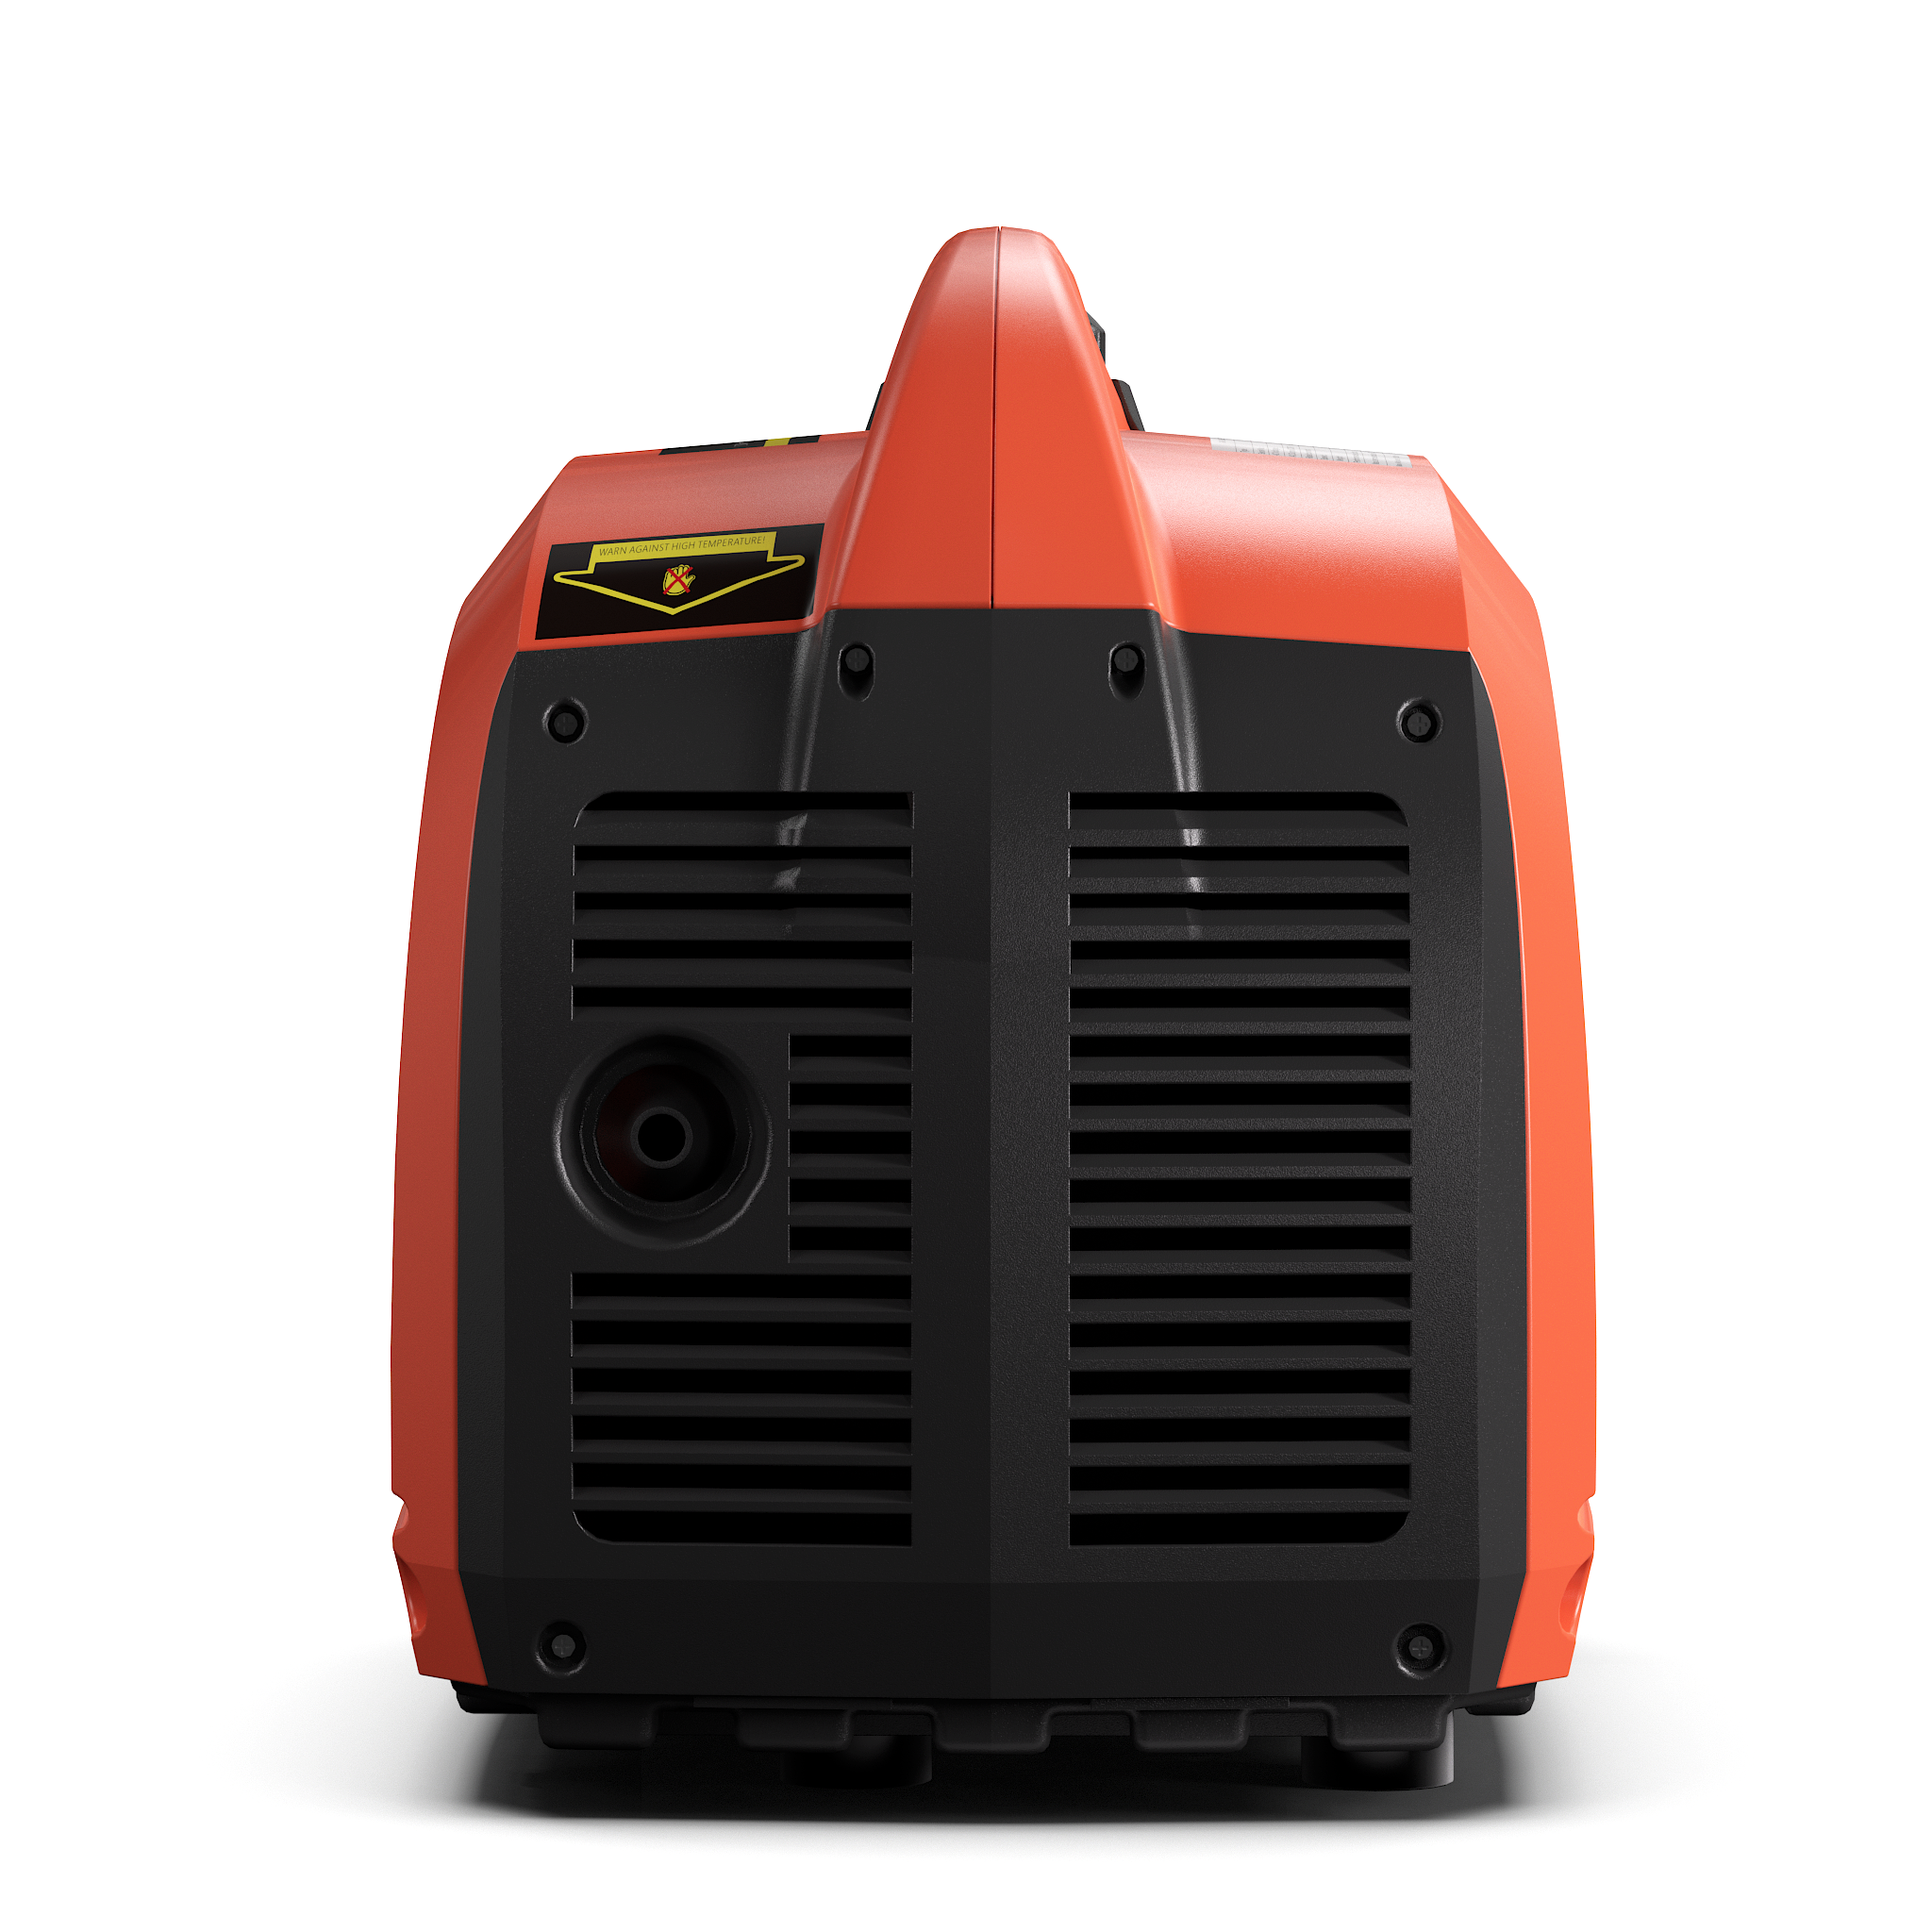 EYG1000G Portable Gasoline Generator 750W, Quiet Generatorl for Camping & Home Backup Power